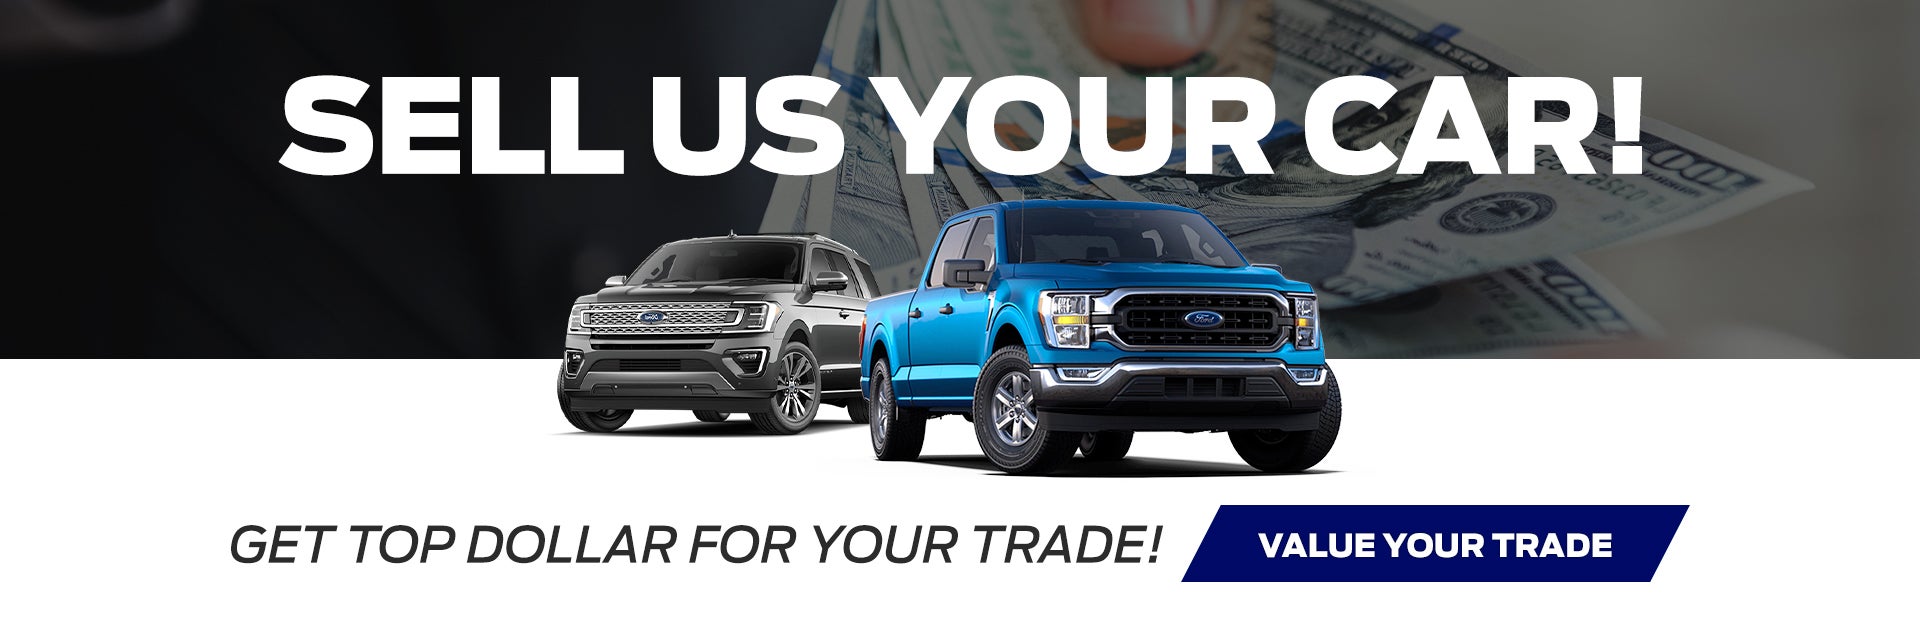 Sell Us Your Car at Whiteface Ford Hereford TX 